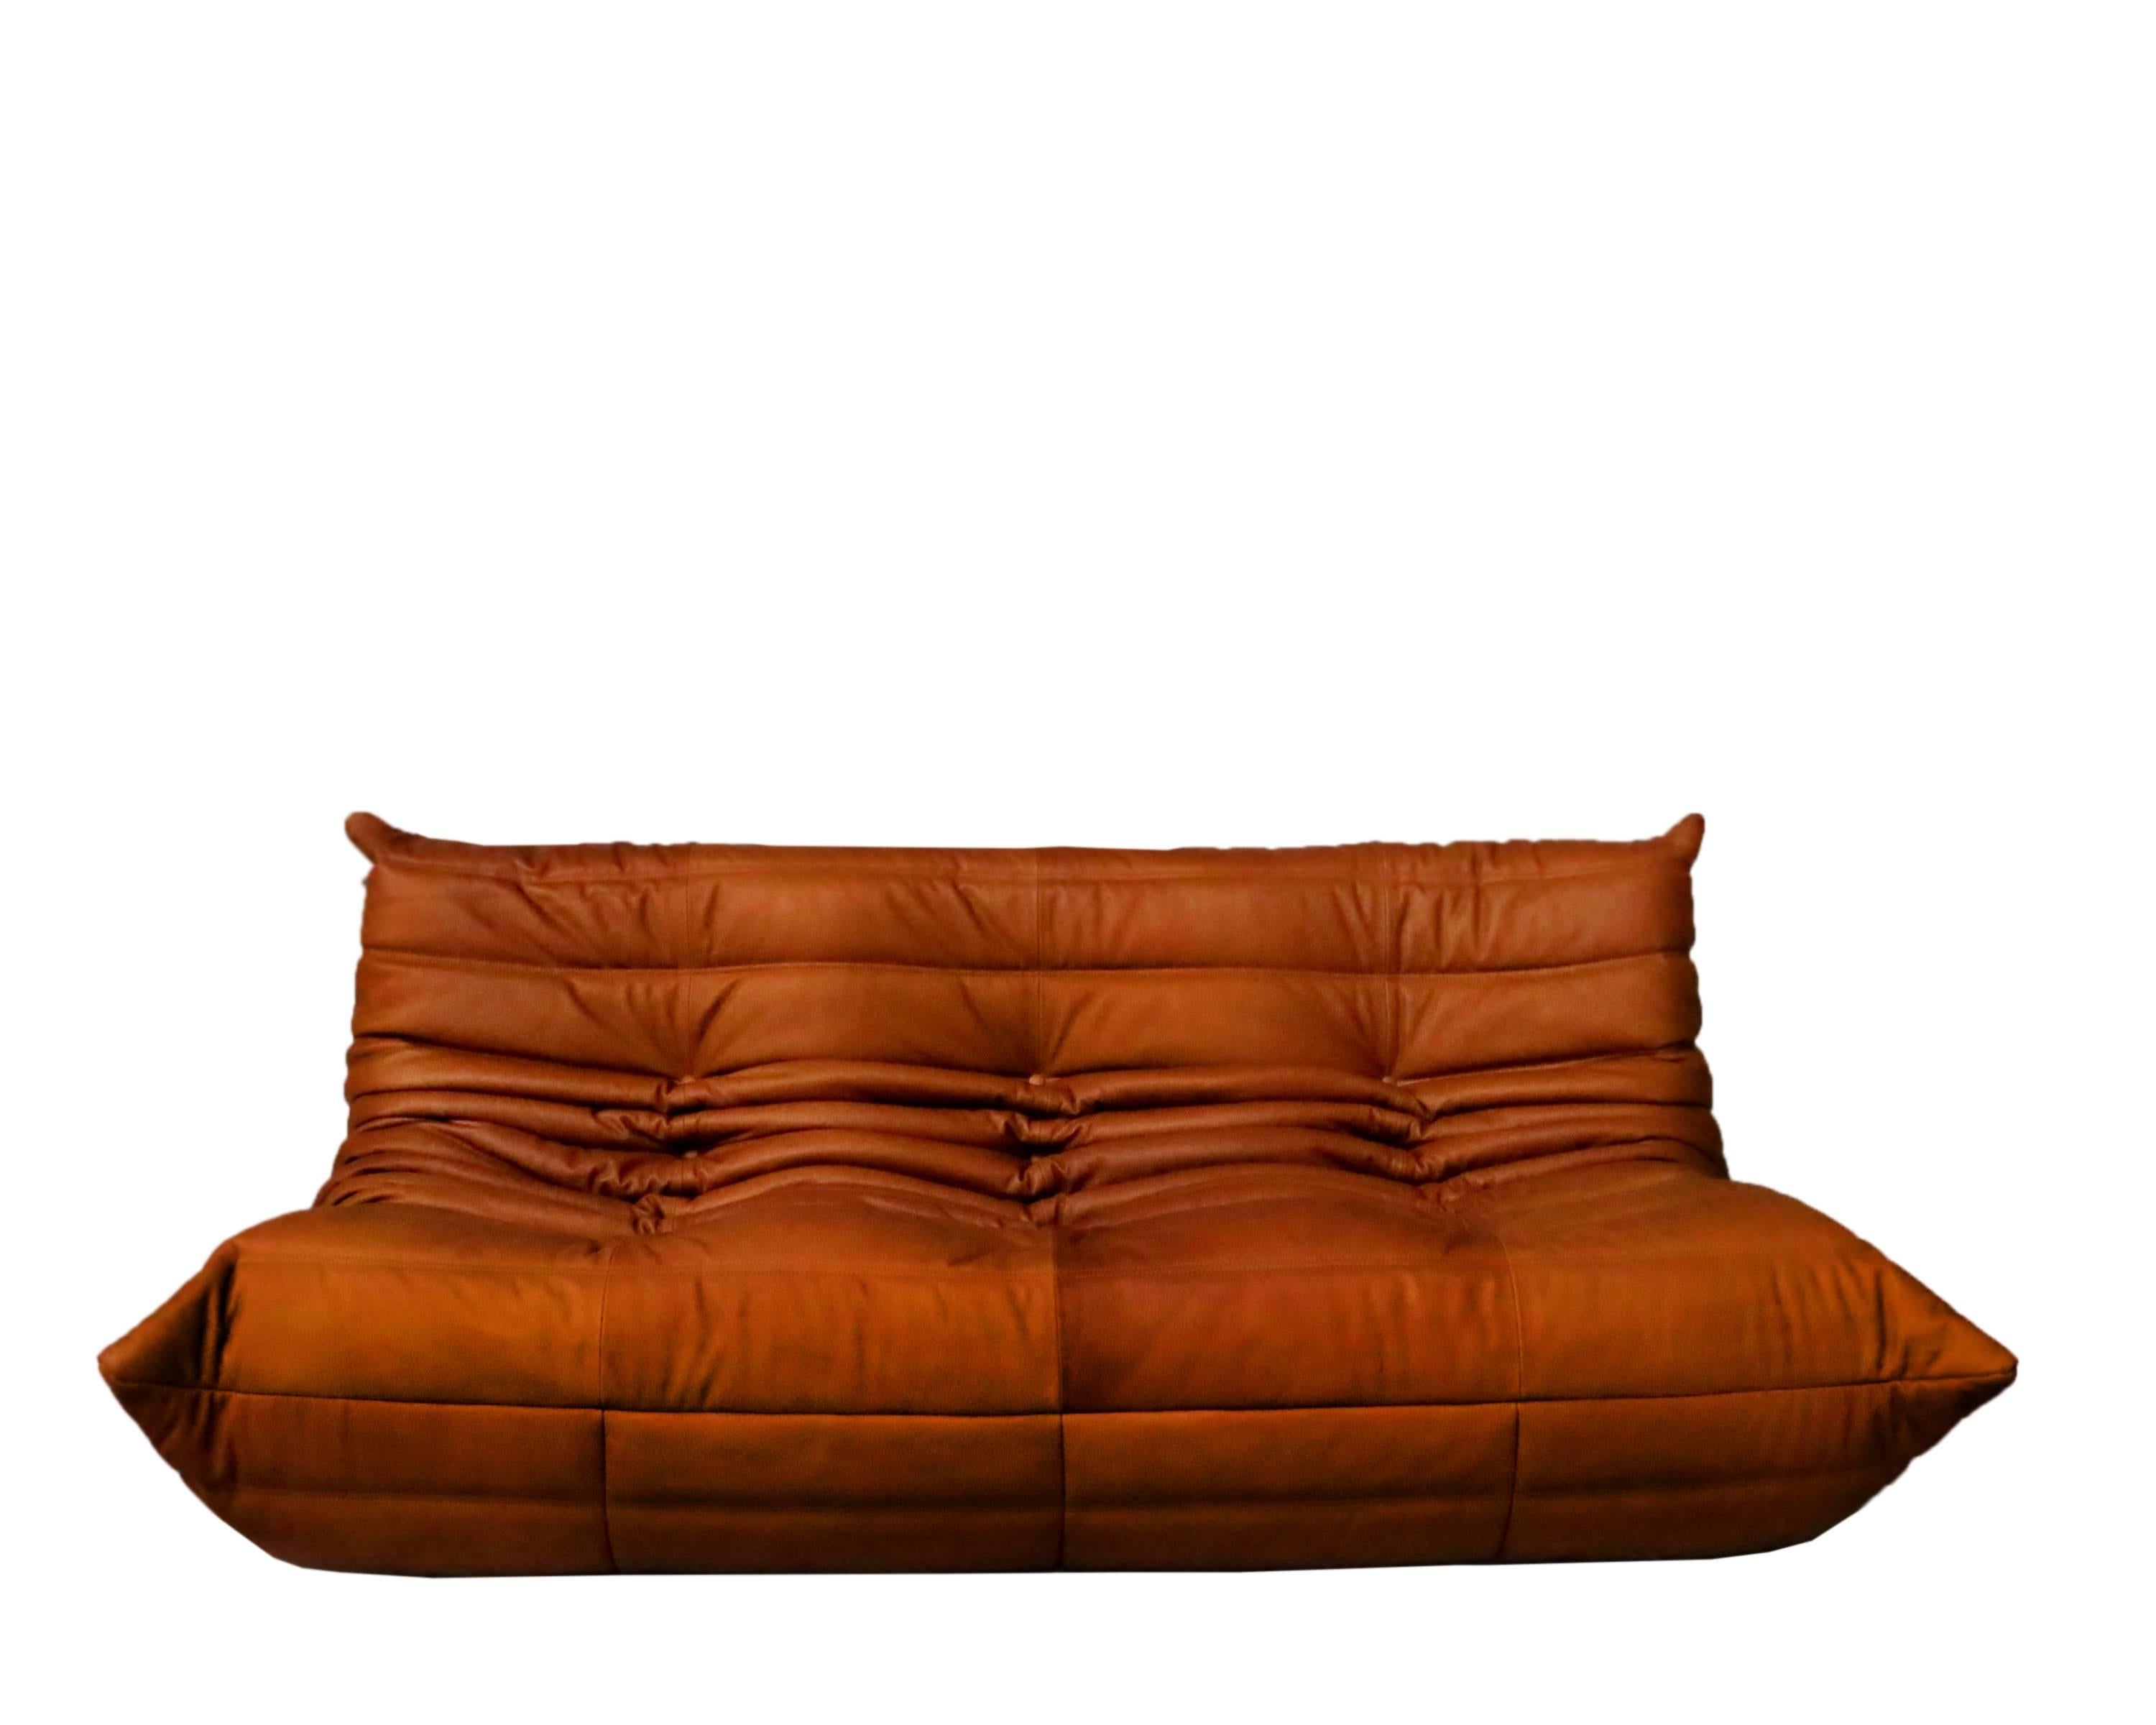 We are famous for our top quality leather and our excellent togo Ligne Roset upholstering specialty.
1 three-seat
1 two-seat
1 single seat
1 pouf
1 corner pieces.

Iconic French sofa set. Wonderful full grain cognac leather edition. Designed 1973,